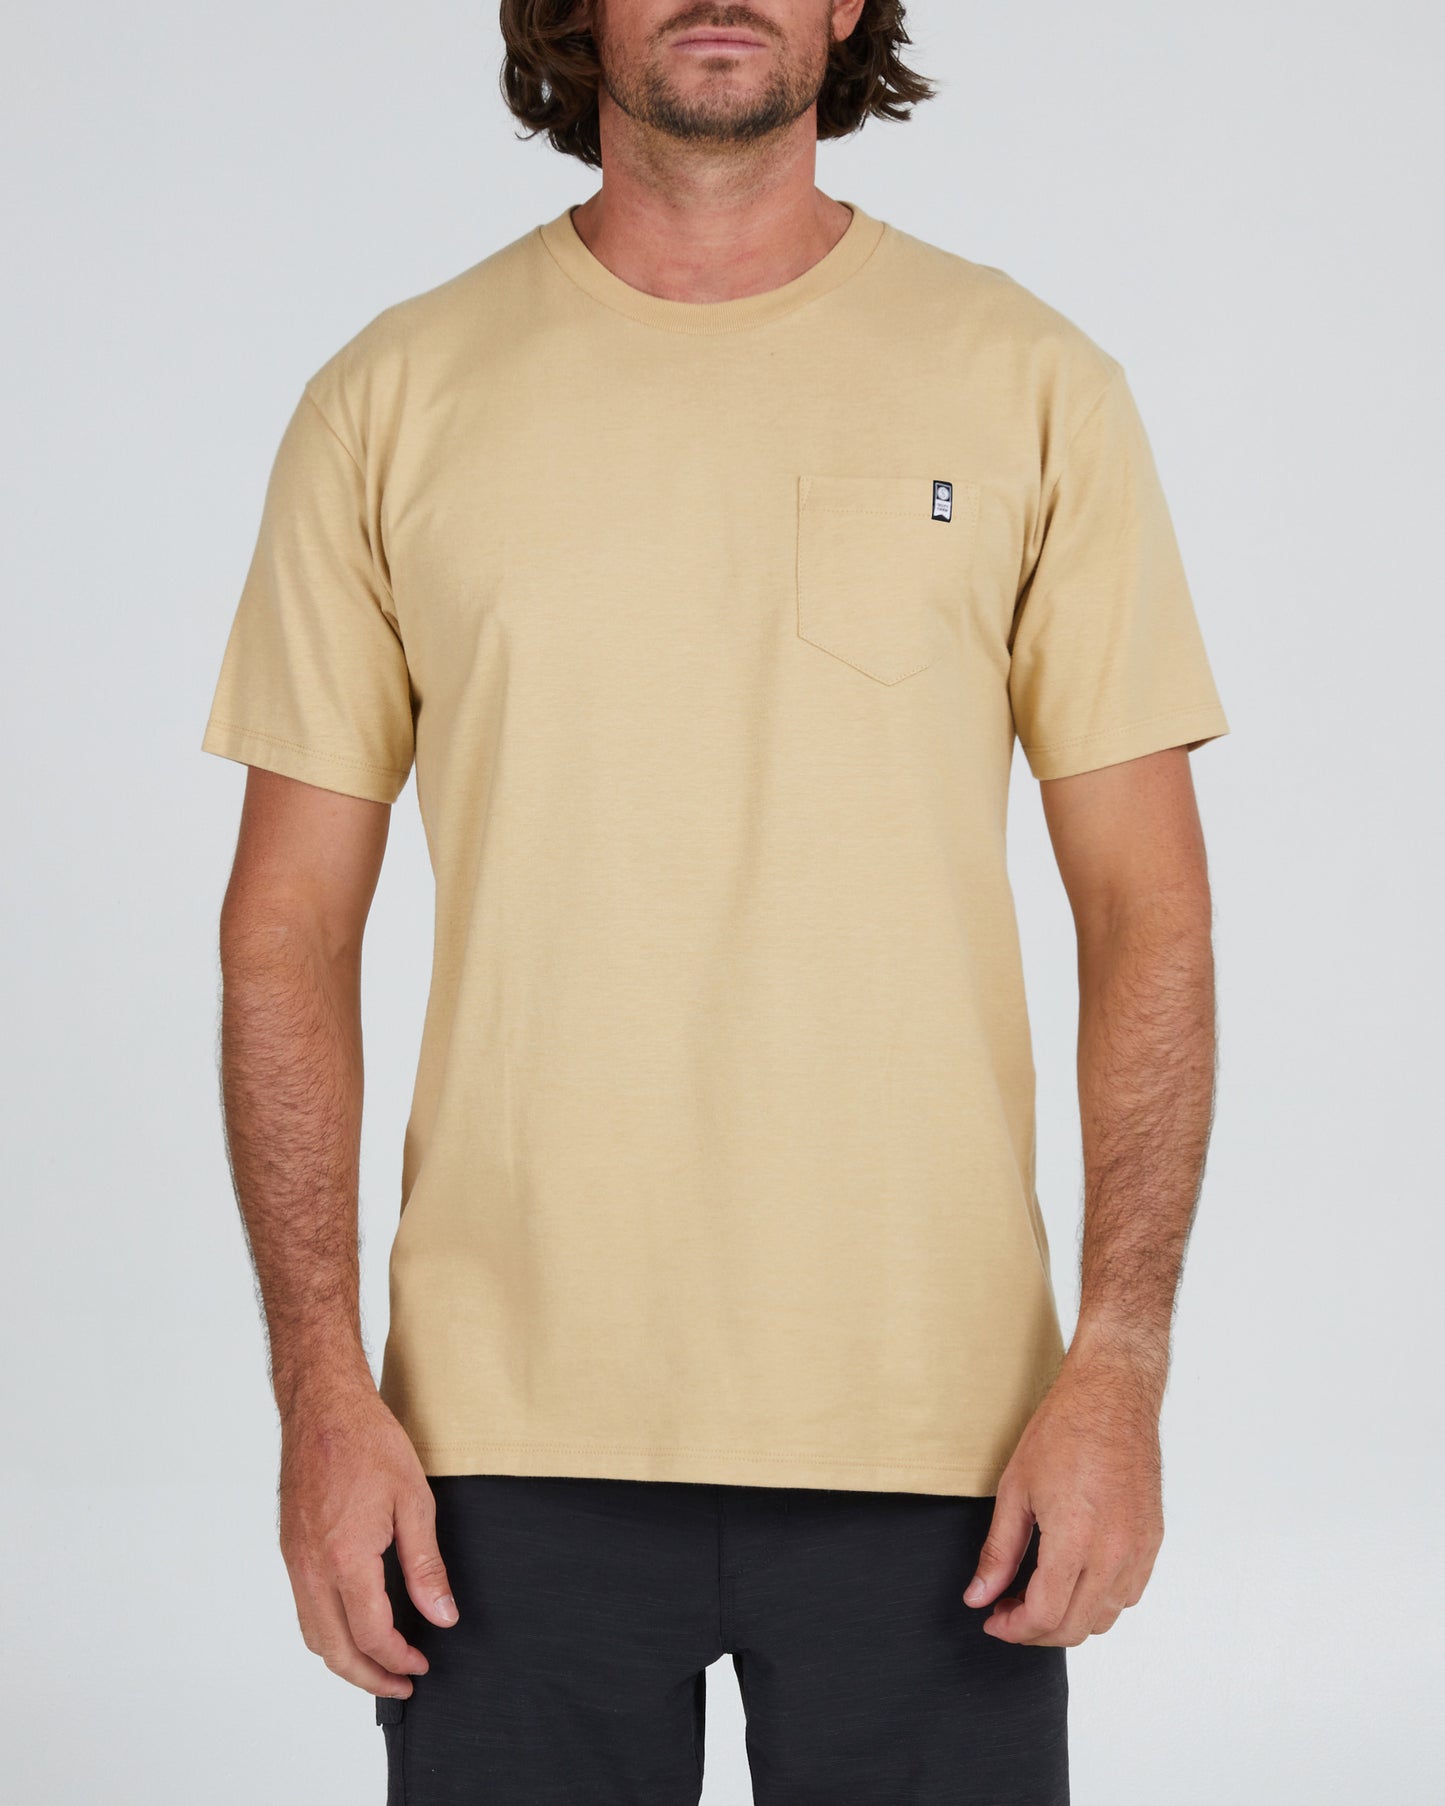 front view of Deep Pockets Camel S/S Premium Pocket Tee